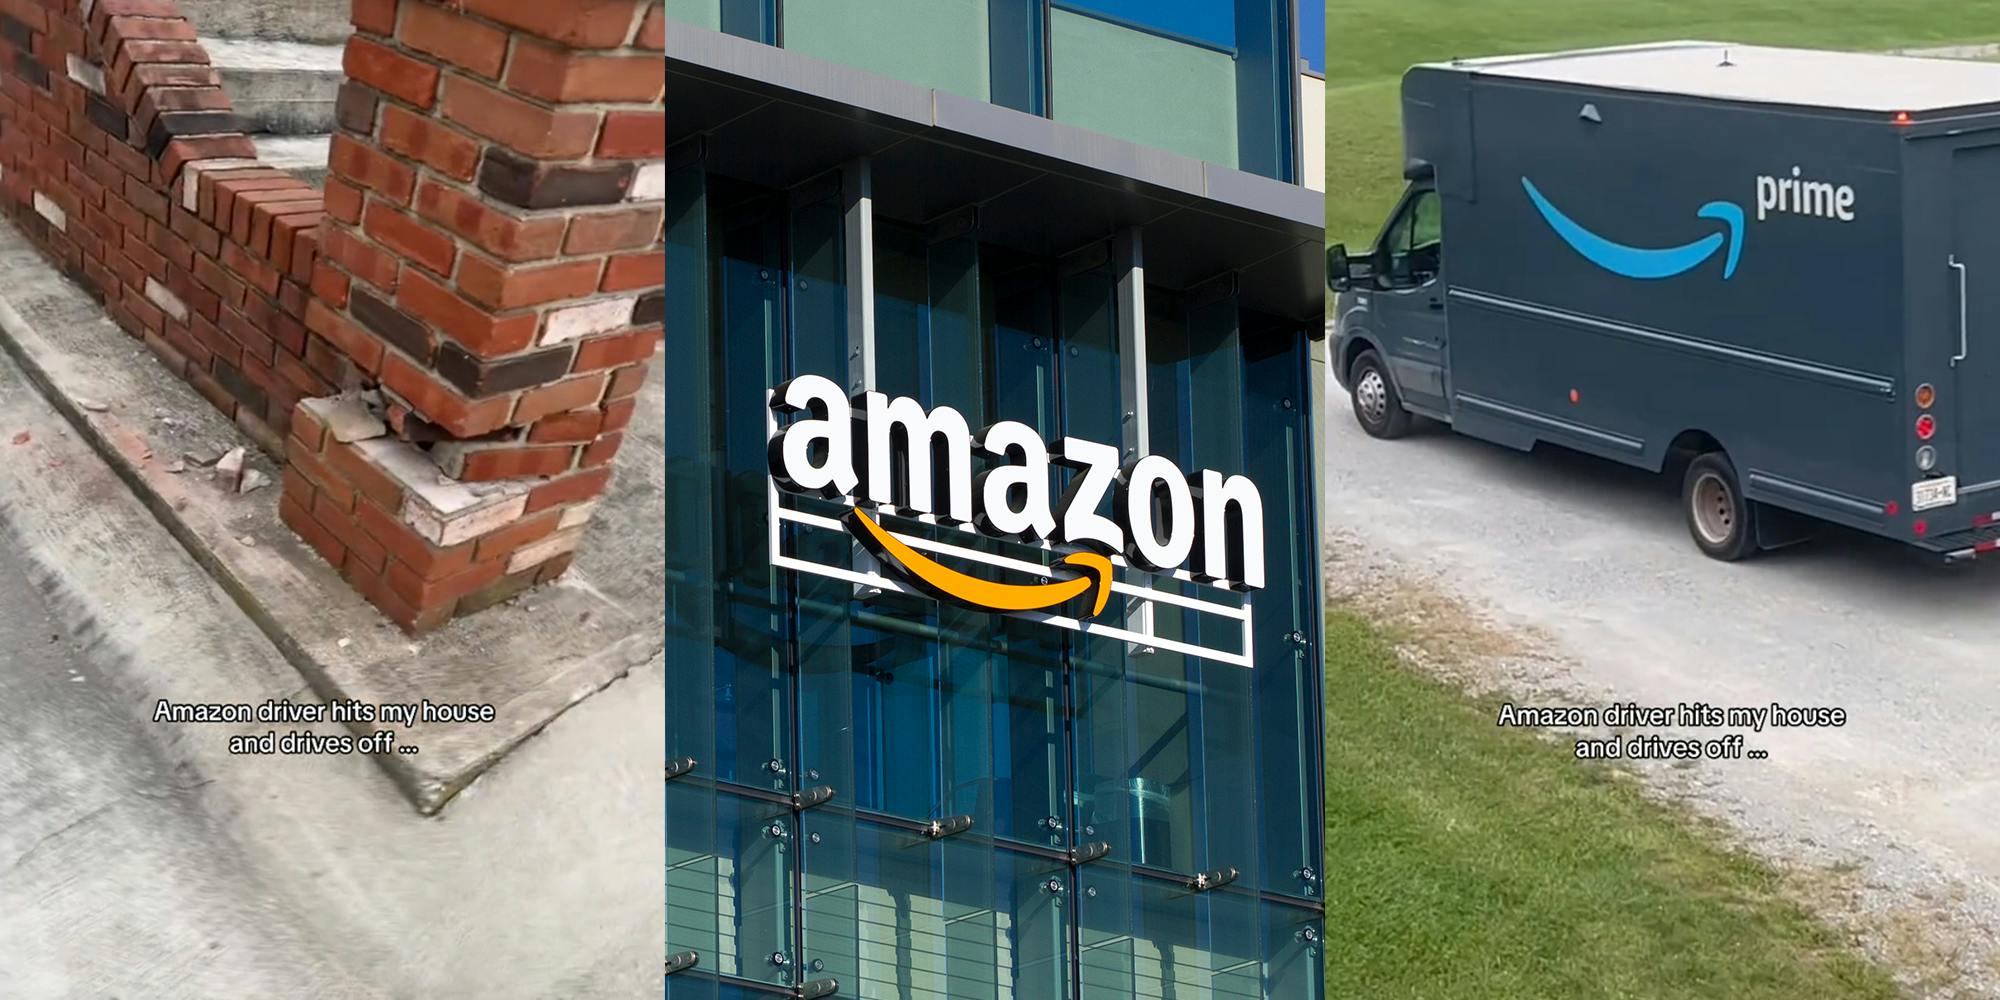 Woman says Amazon driver hit her house, drove away